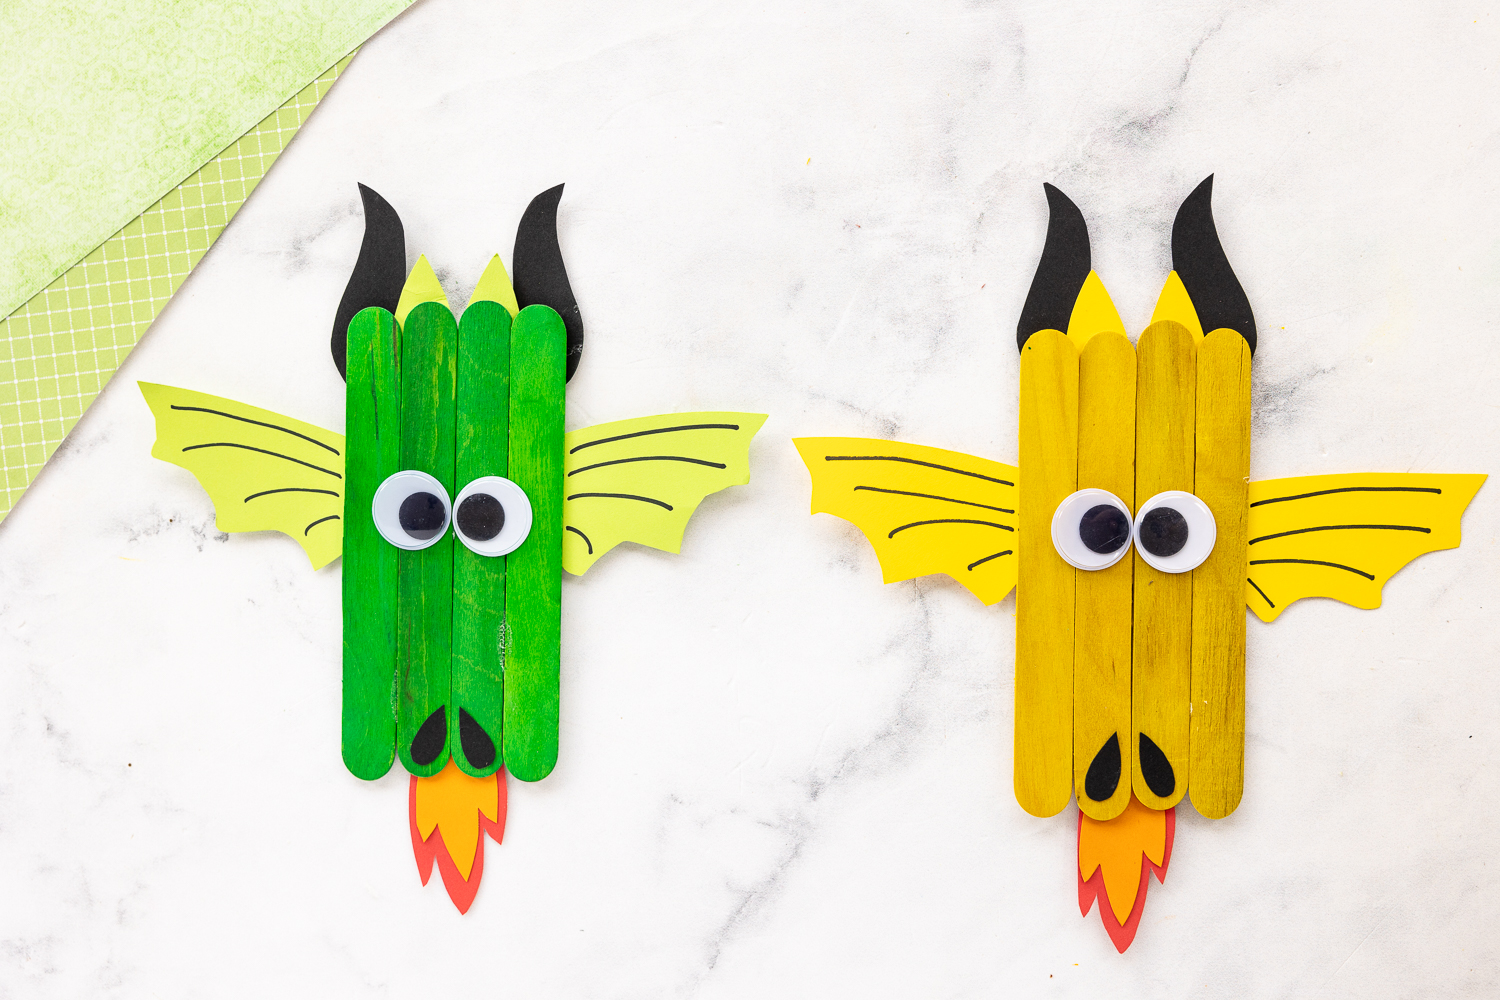 popsicle stick dragons on counter with green scrapbook paper nearby